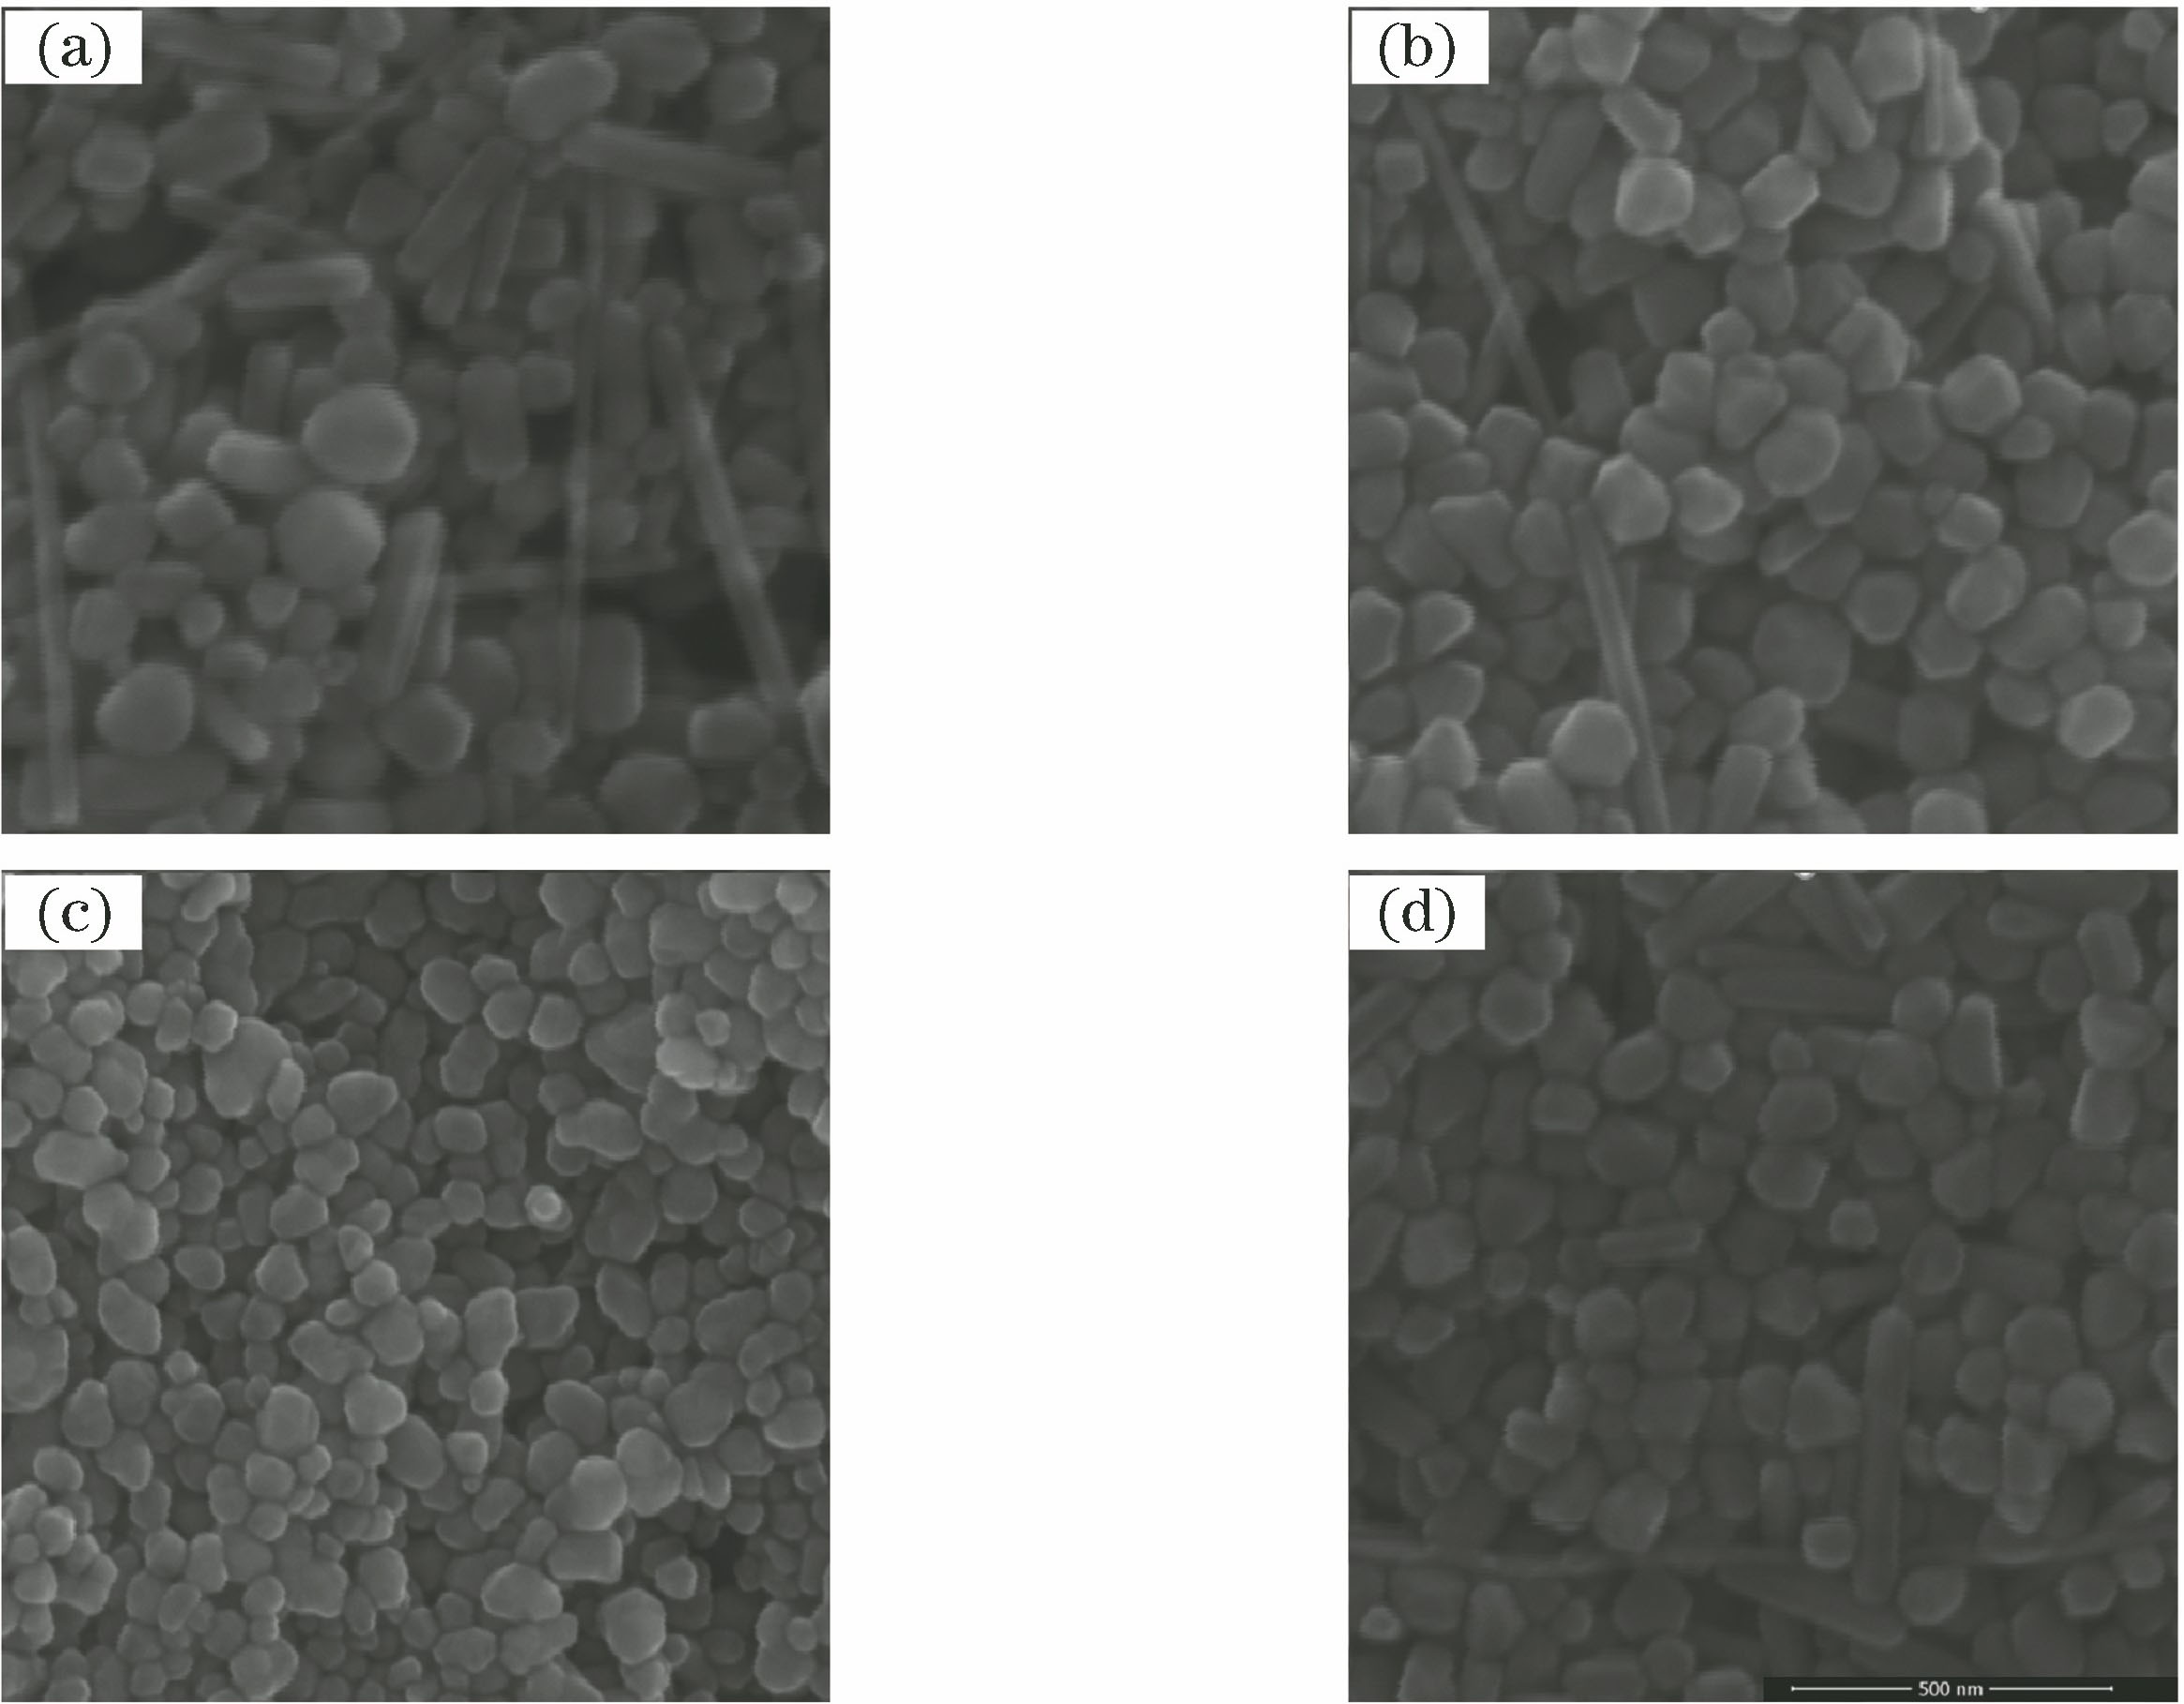 SEM images of silver nanoparticles with different particle diameters. (a) P1 silver nanoparticles; (b) P2 silver nanoparticles; (c) P3 silver nanoparticles; (d) P4 silver nanoparticles